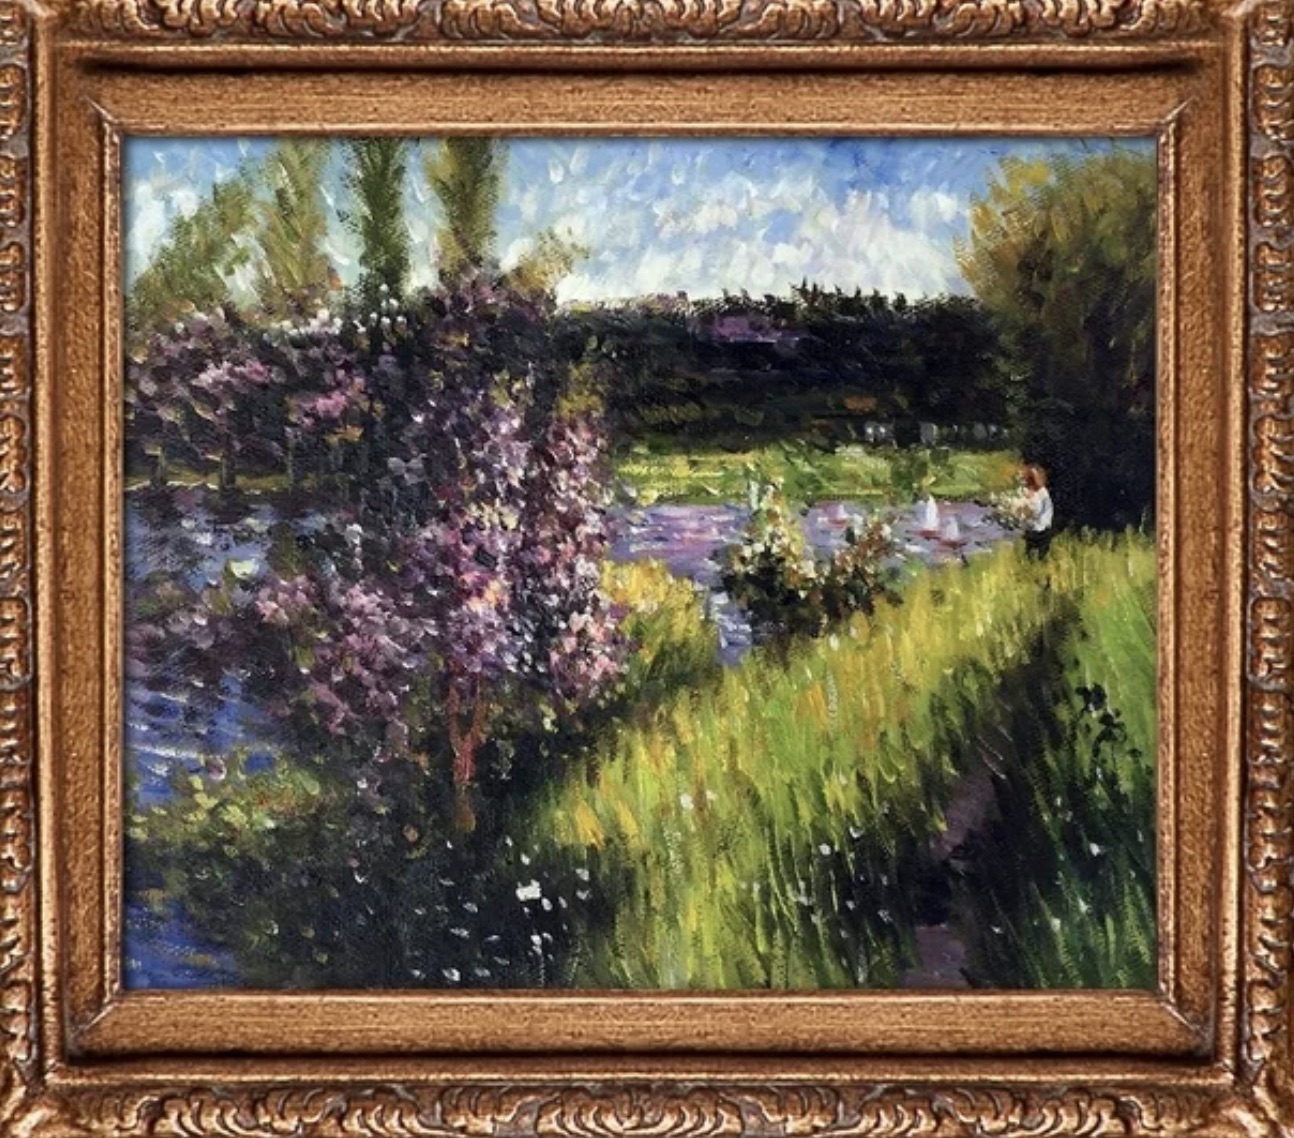 Pierre Auguste Renoir "The Seine at Chatou" Oil Painting, After - Image 3 of 5